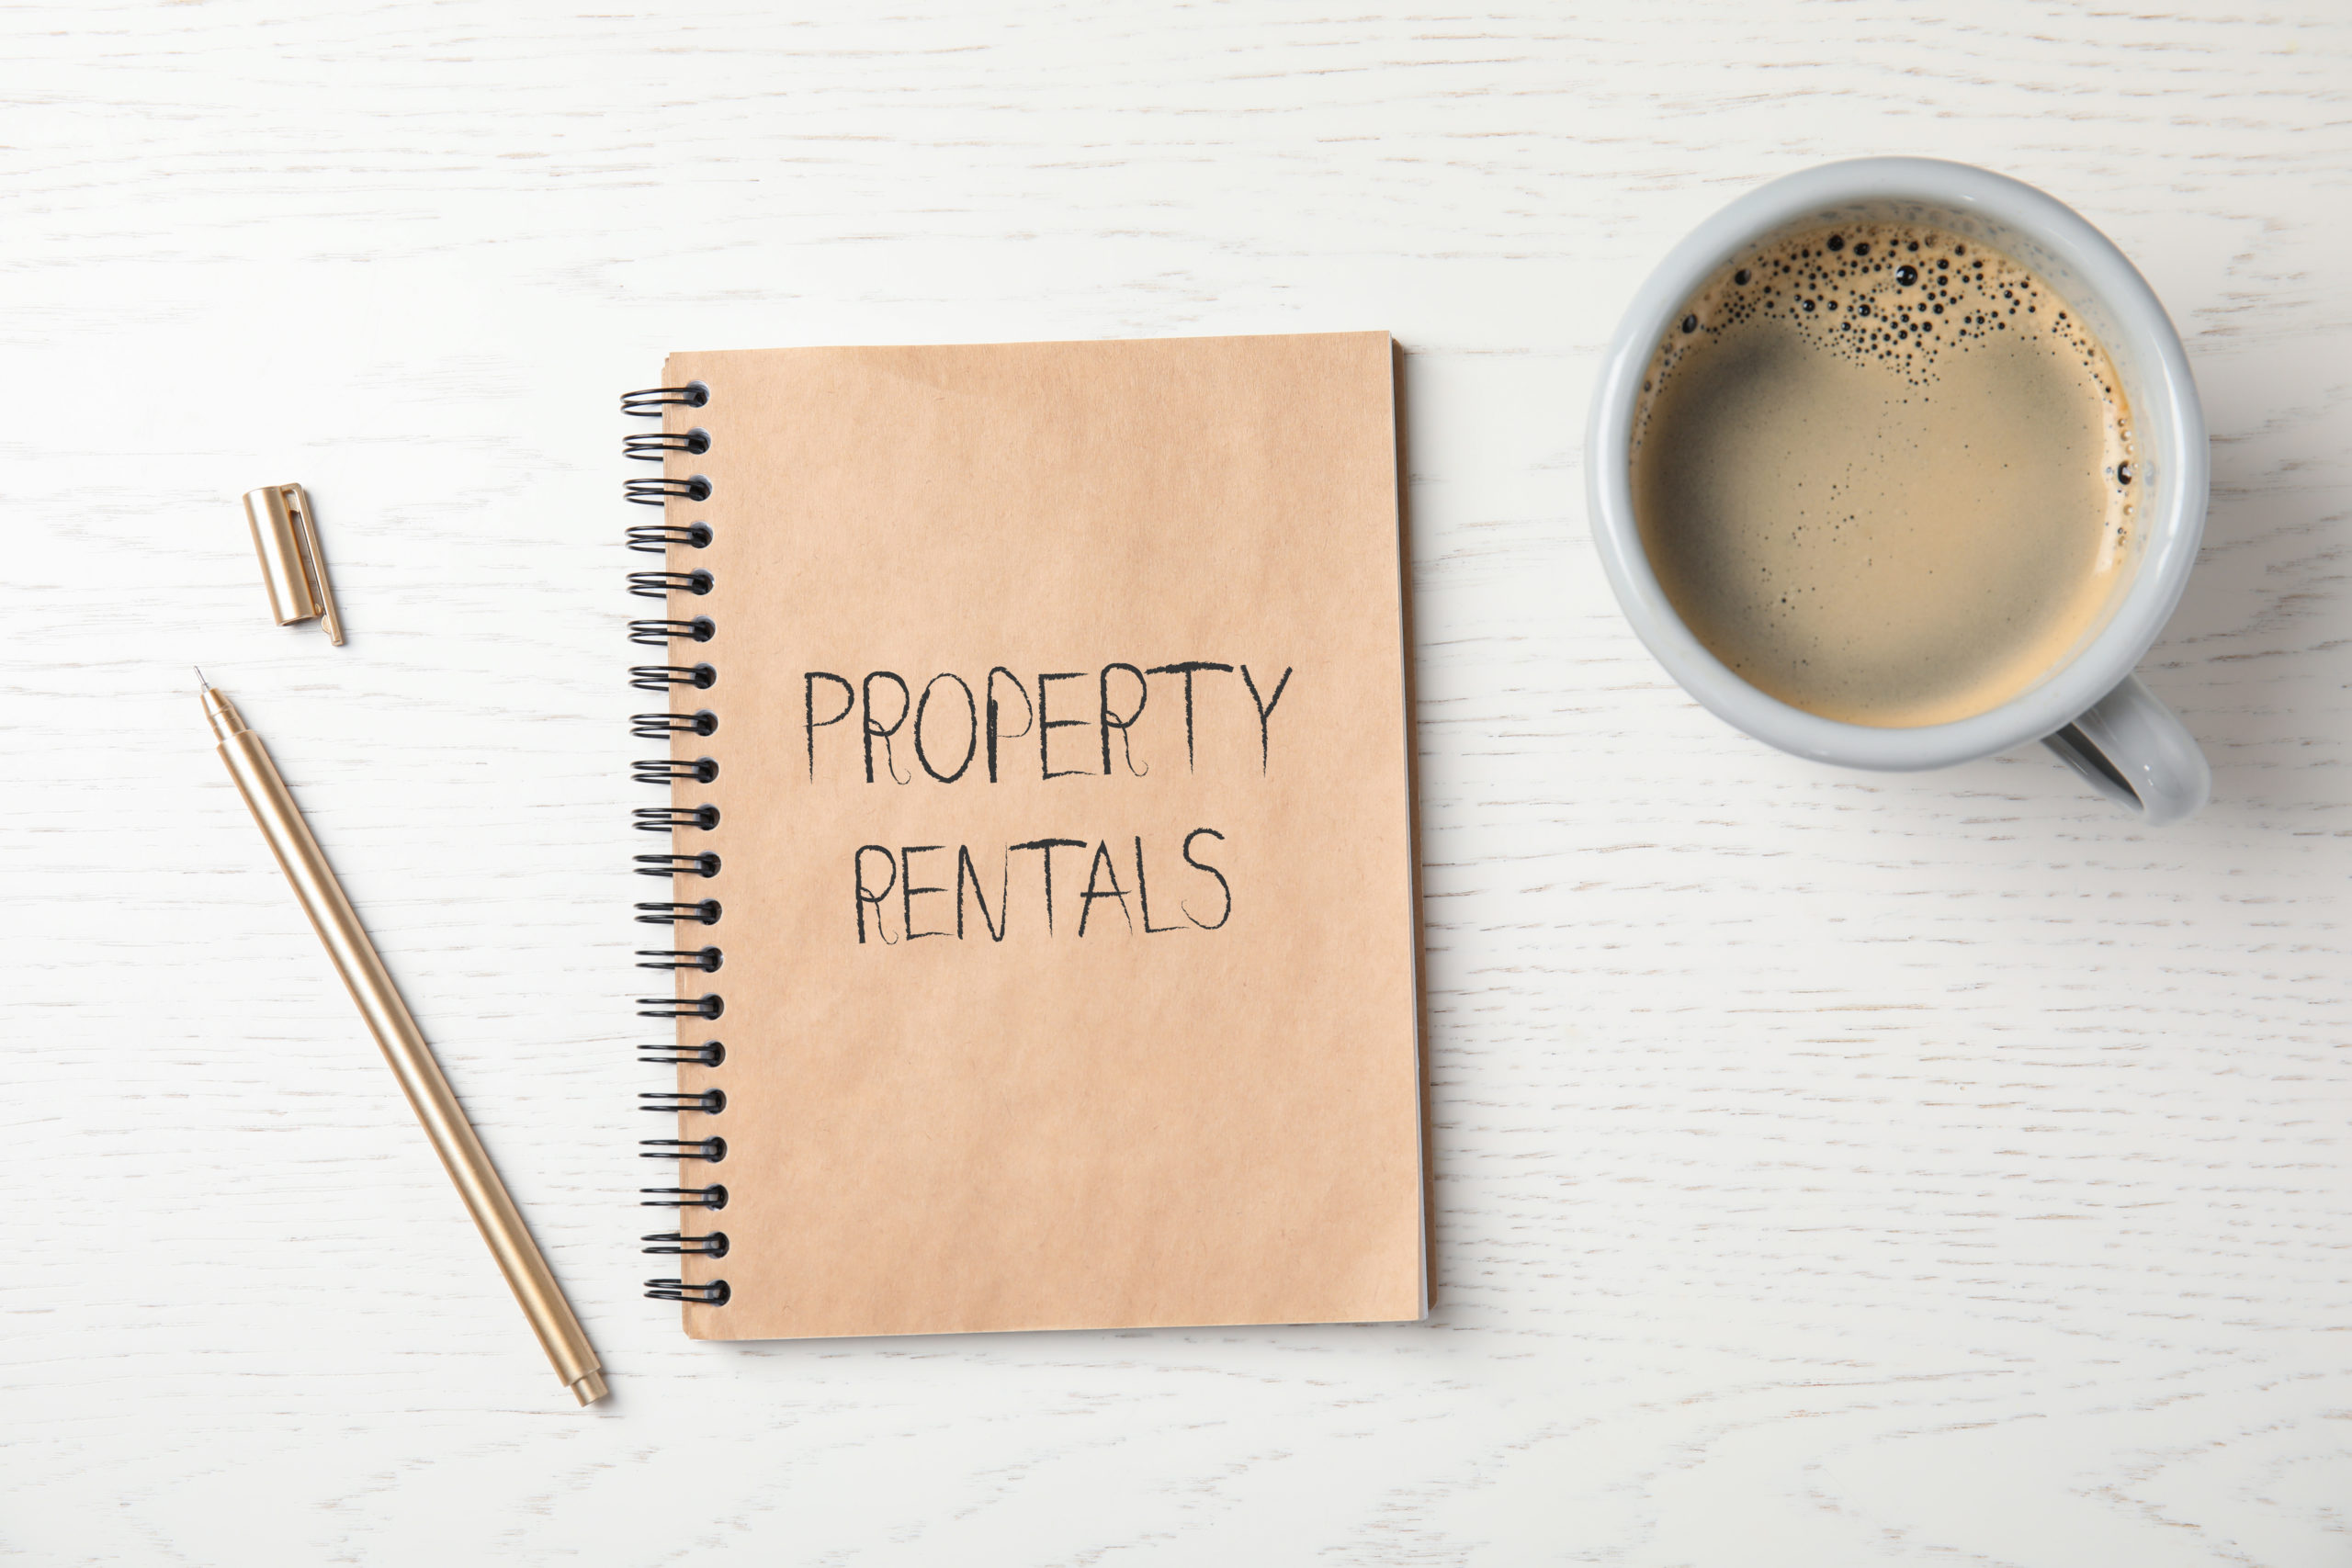 The Cost Of Living Crisis: How Landlords Can Protect Their Rental Income (6 Tips)